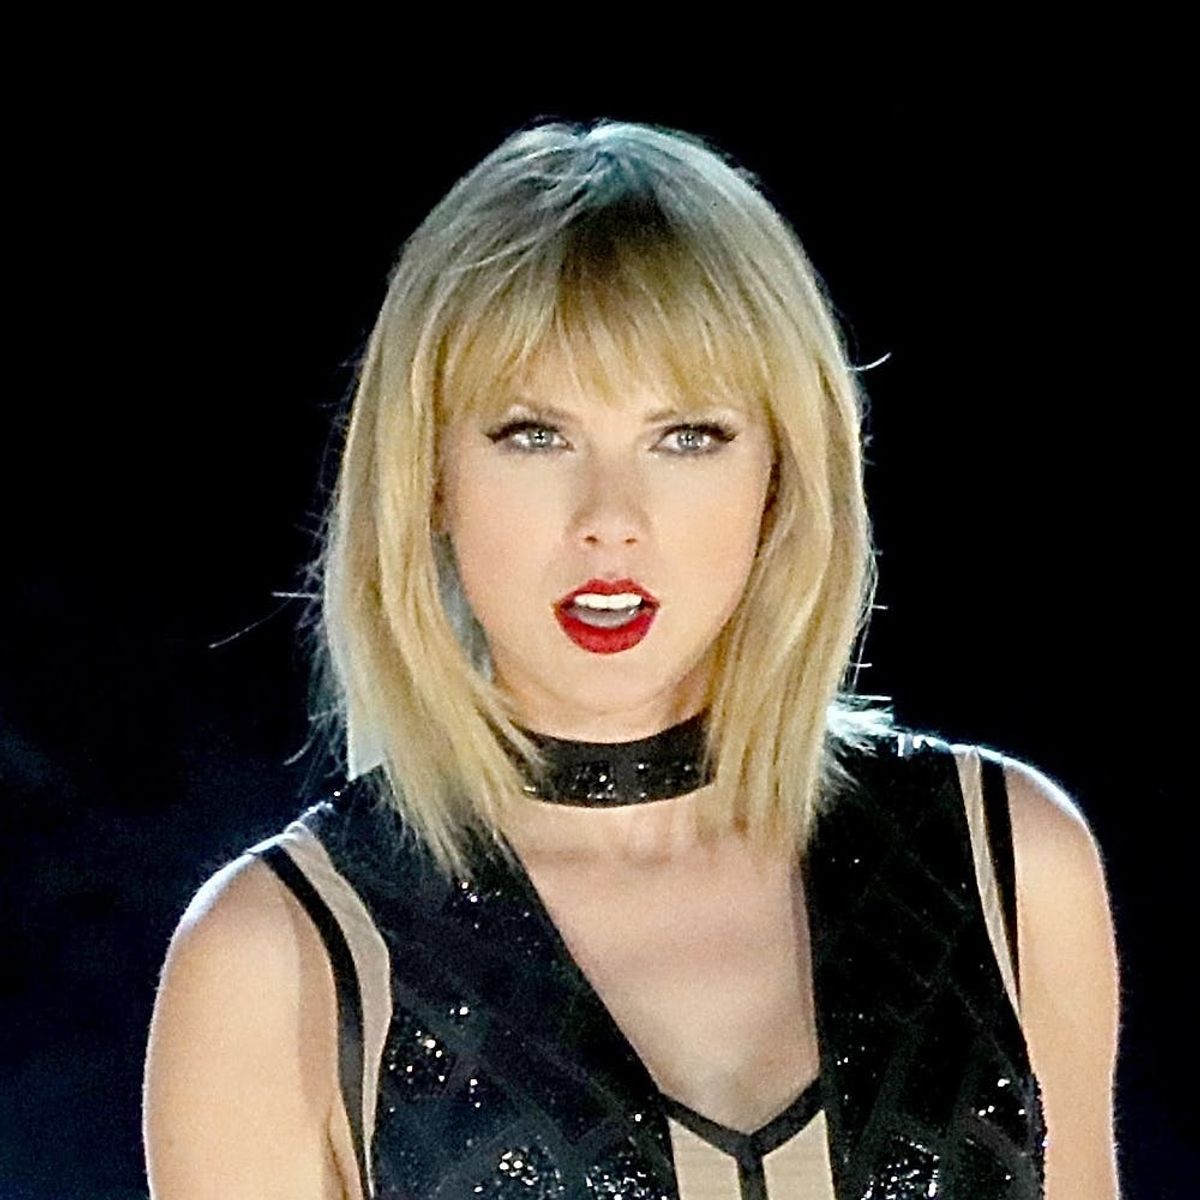 This Seven-Year-Old’s Spot-On Taylor Swift Performance Has Taken the Internet by Storm